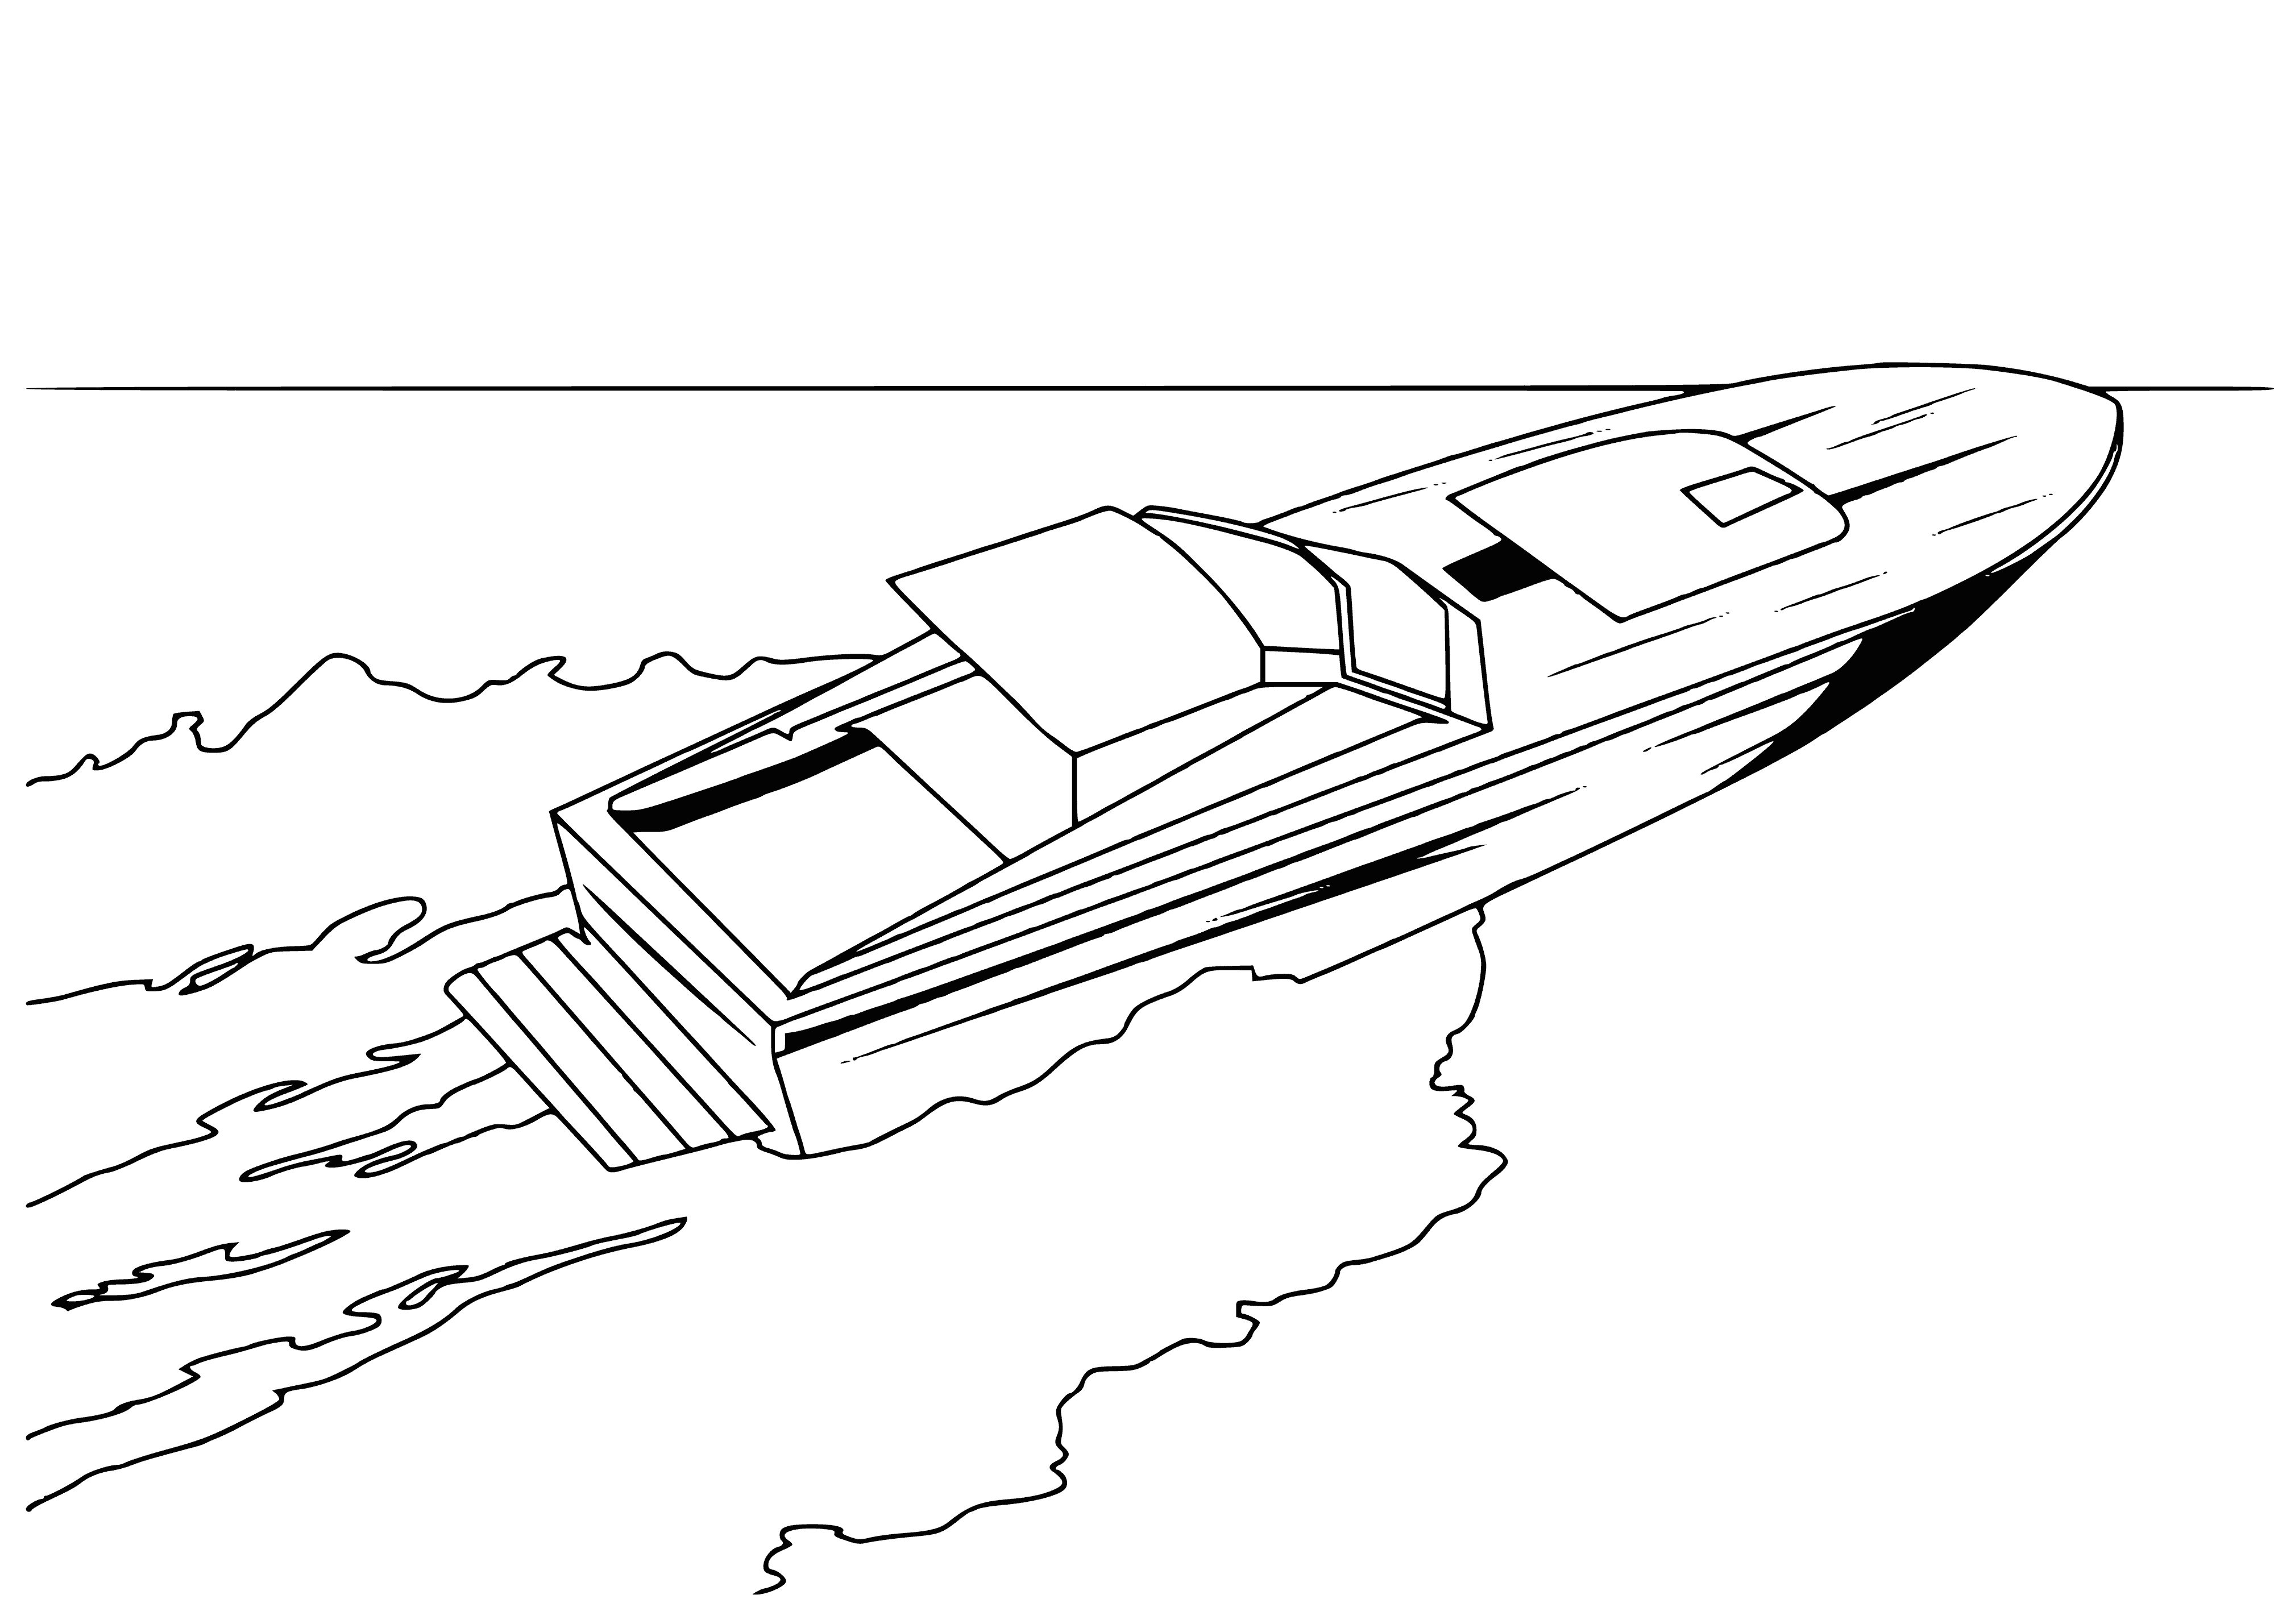 coloring page: Powerboat: Boat propelled by engine, typically has steering wheel & throttle to control speed. #boating #engine